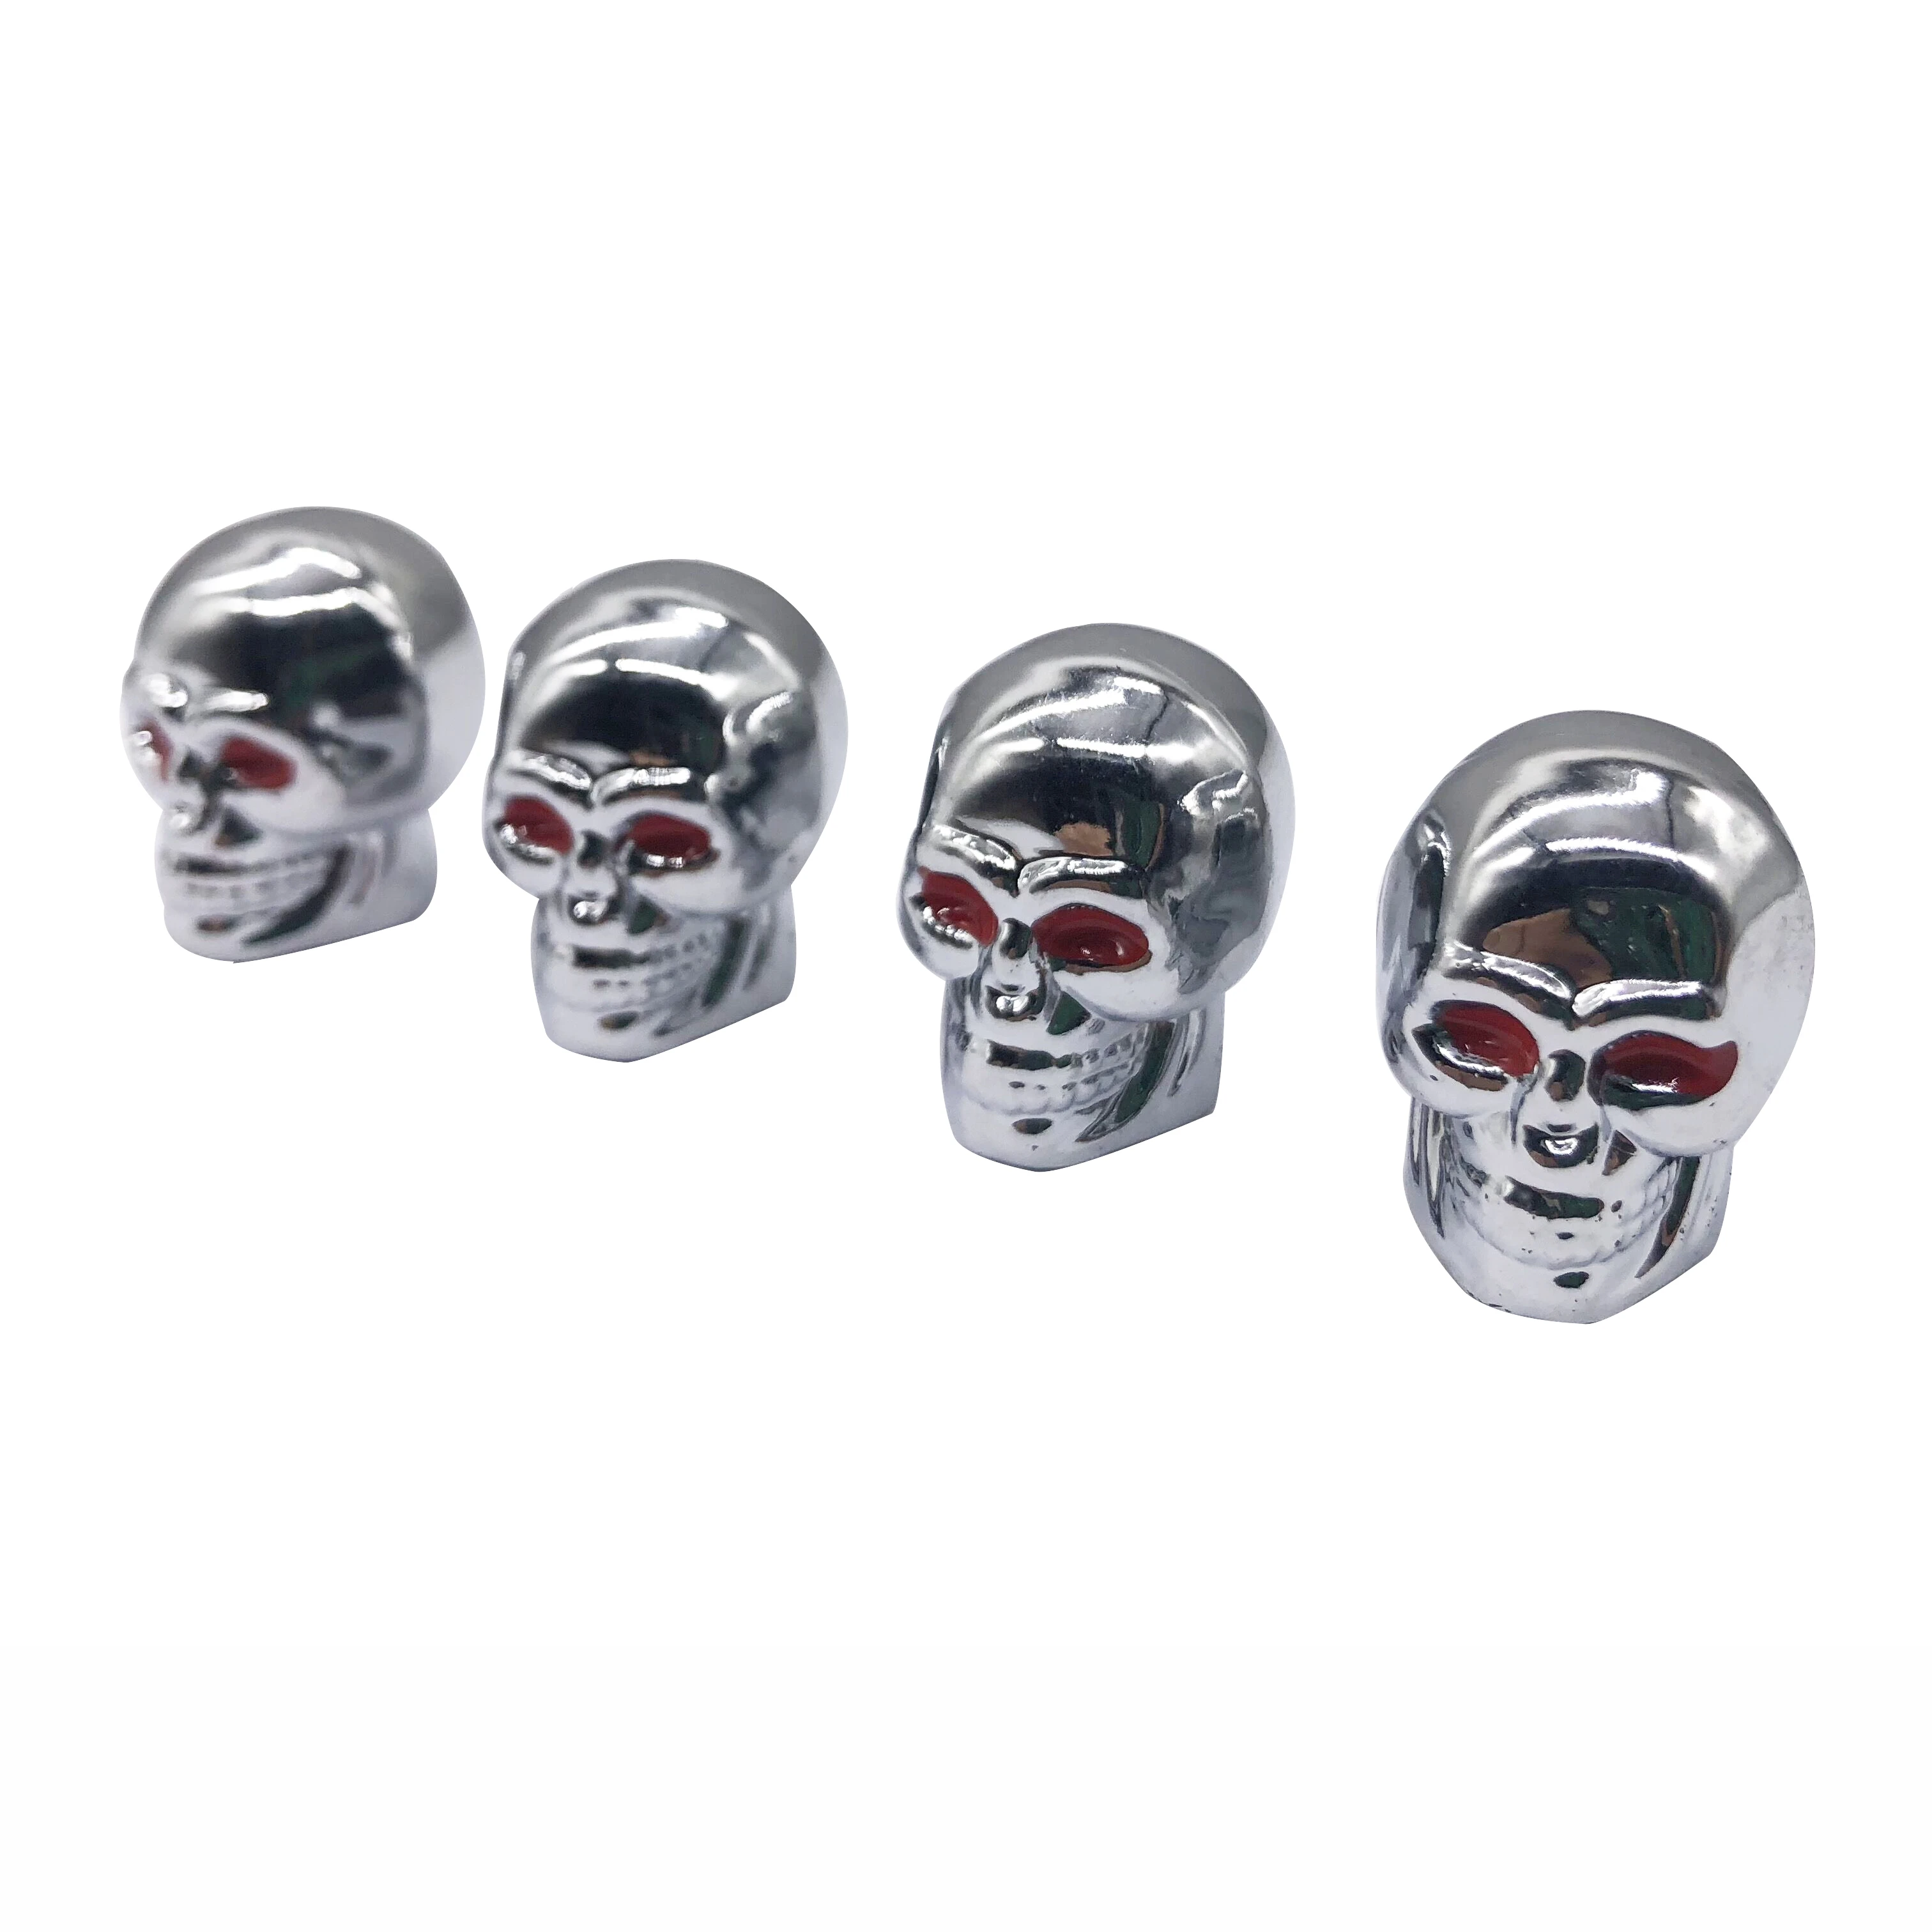 Skull Tire Valve Caps Chrome-plated ABS with Brass Insert Valve Stem Caps Covers